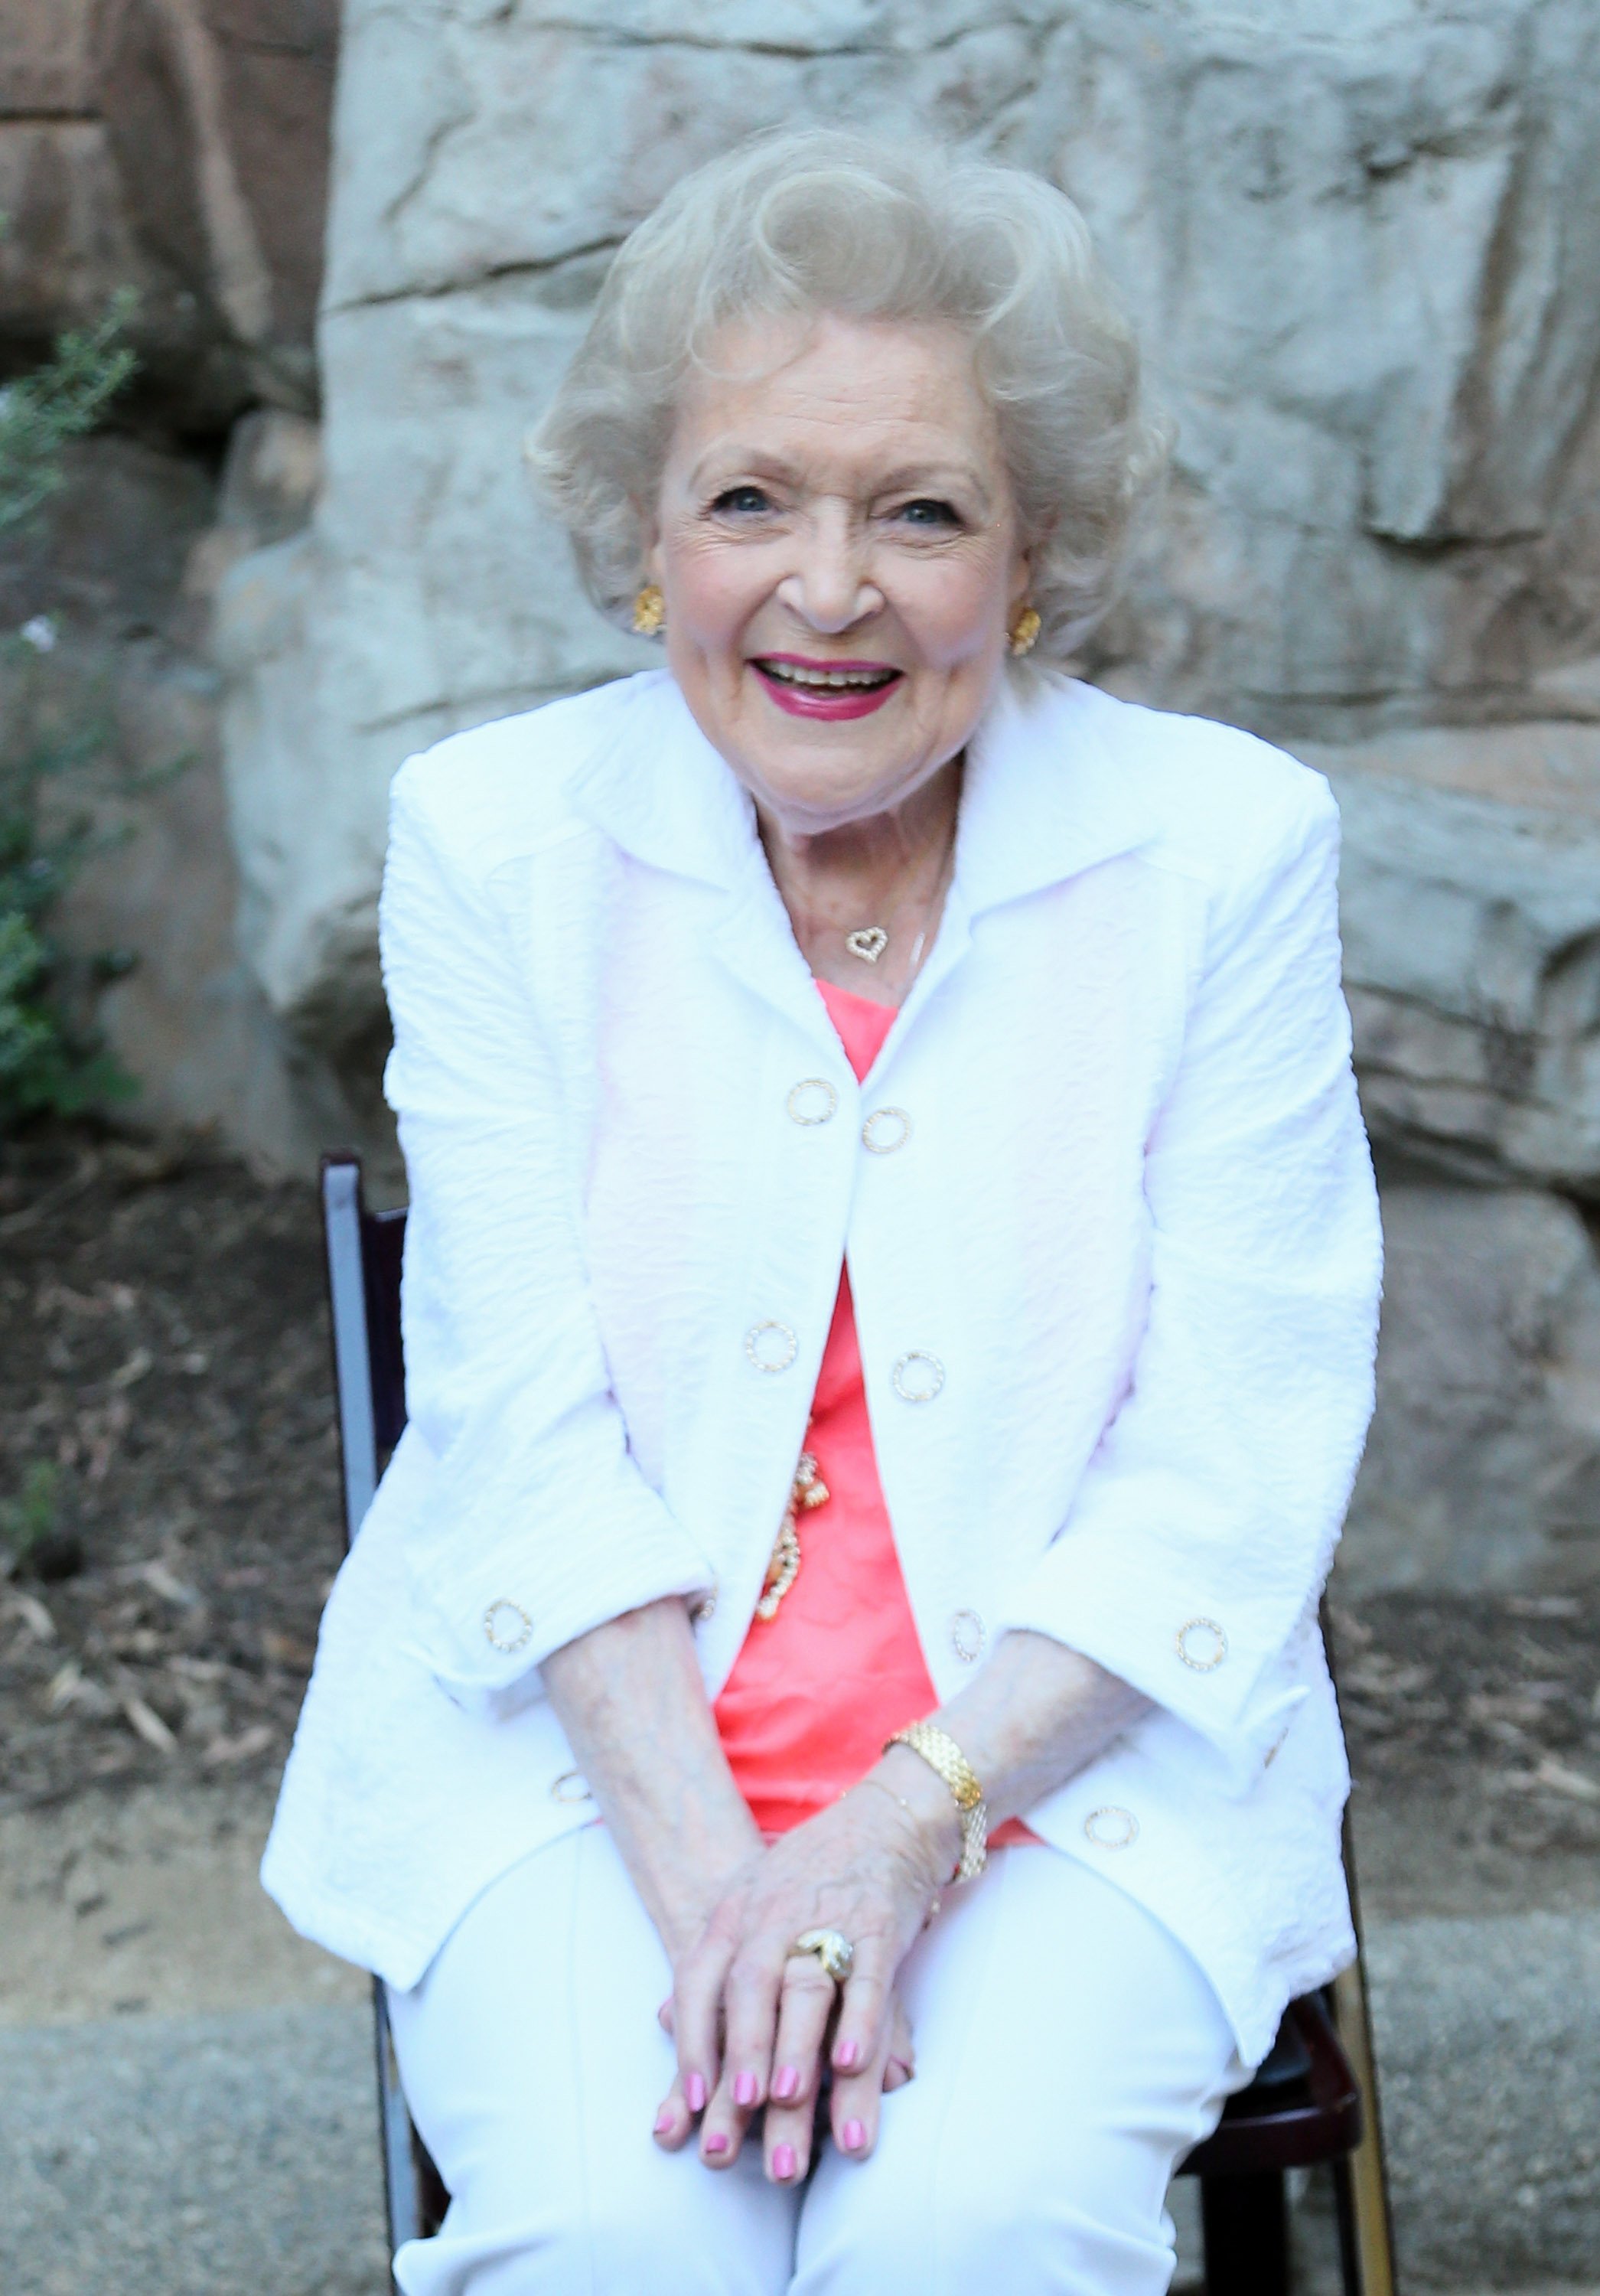 Betty White in Los Angeles 2015. | Source: Getty Images